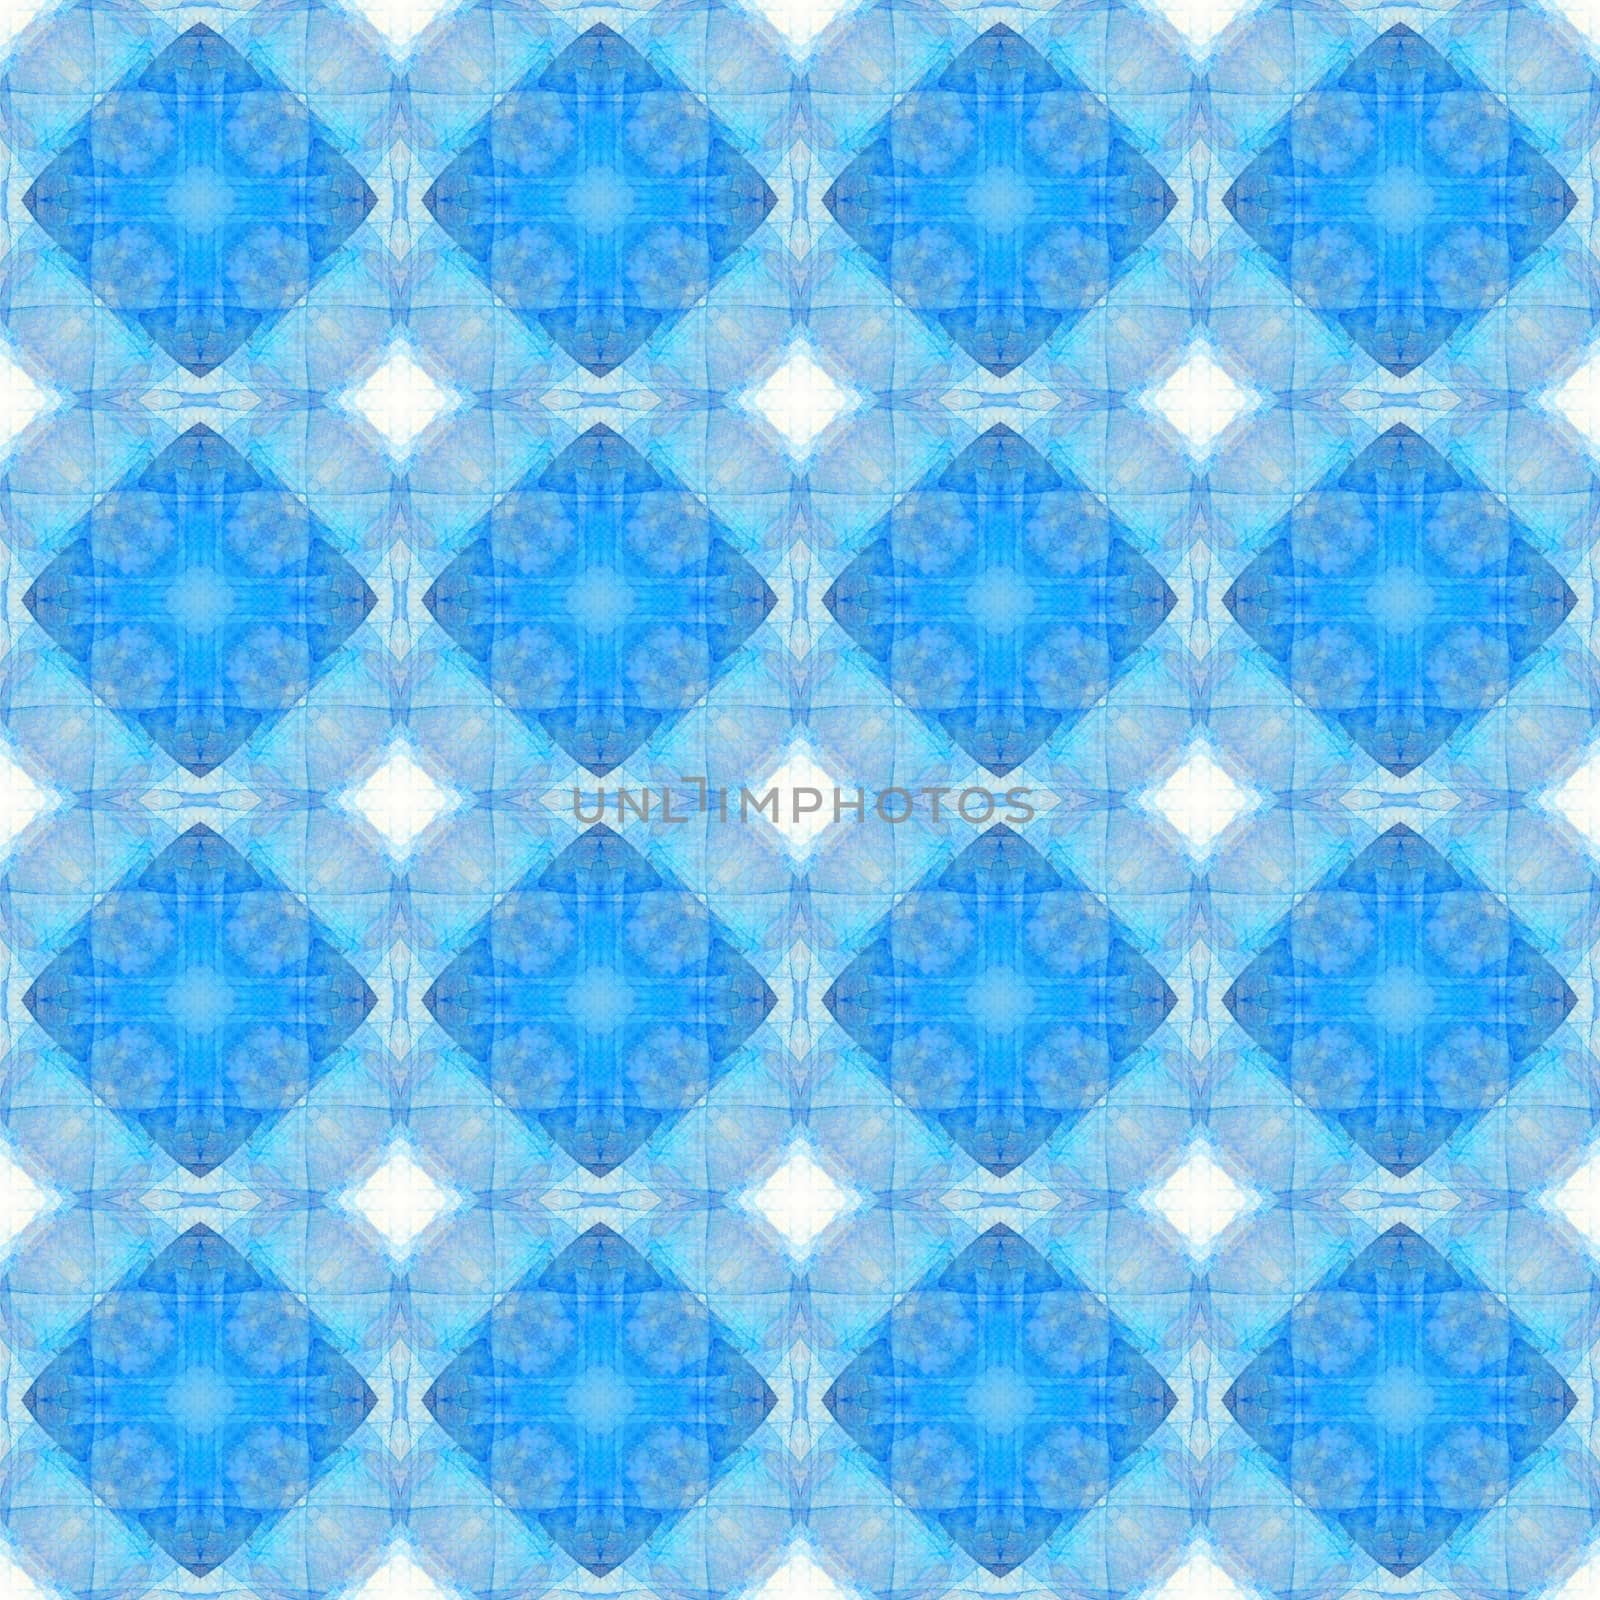 A seamless pattern of complex tiles in various shades of blue with squares and crosses
